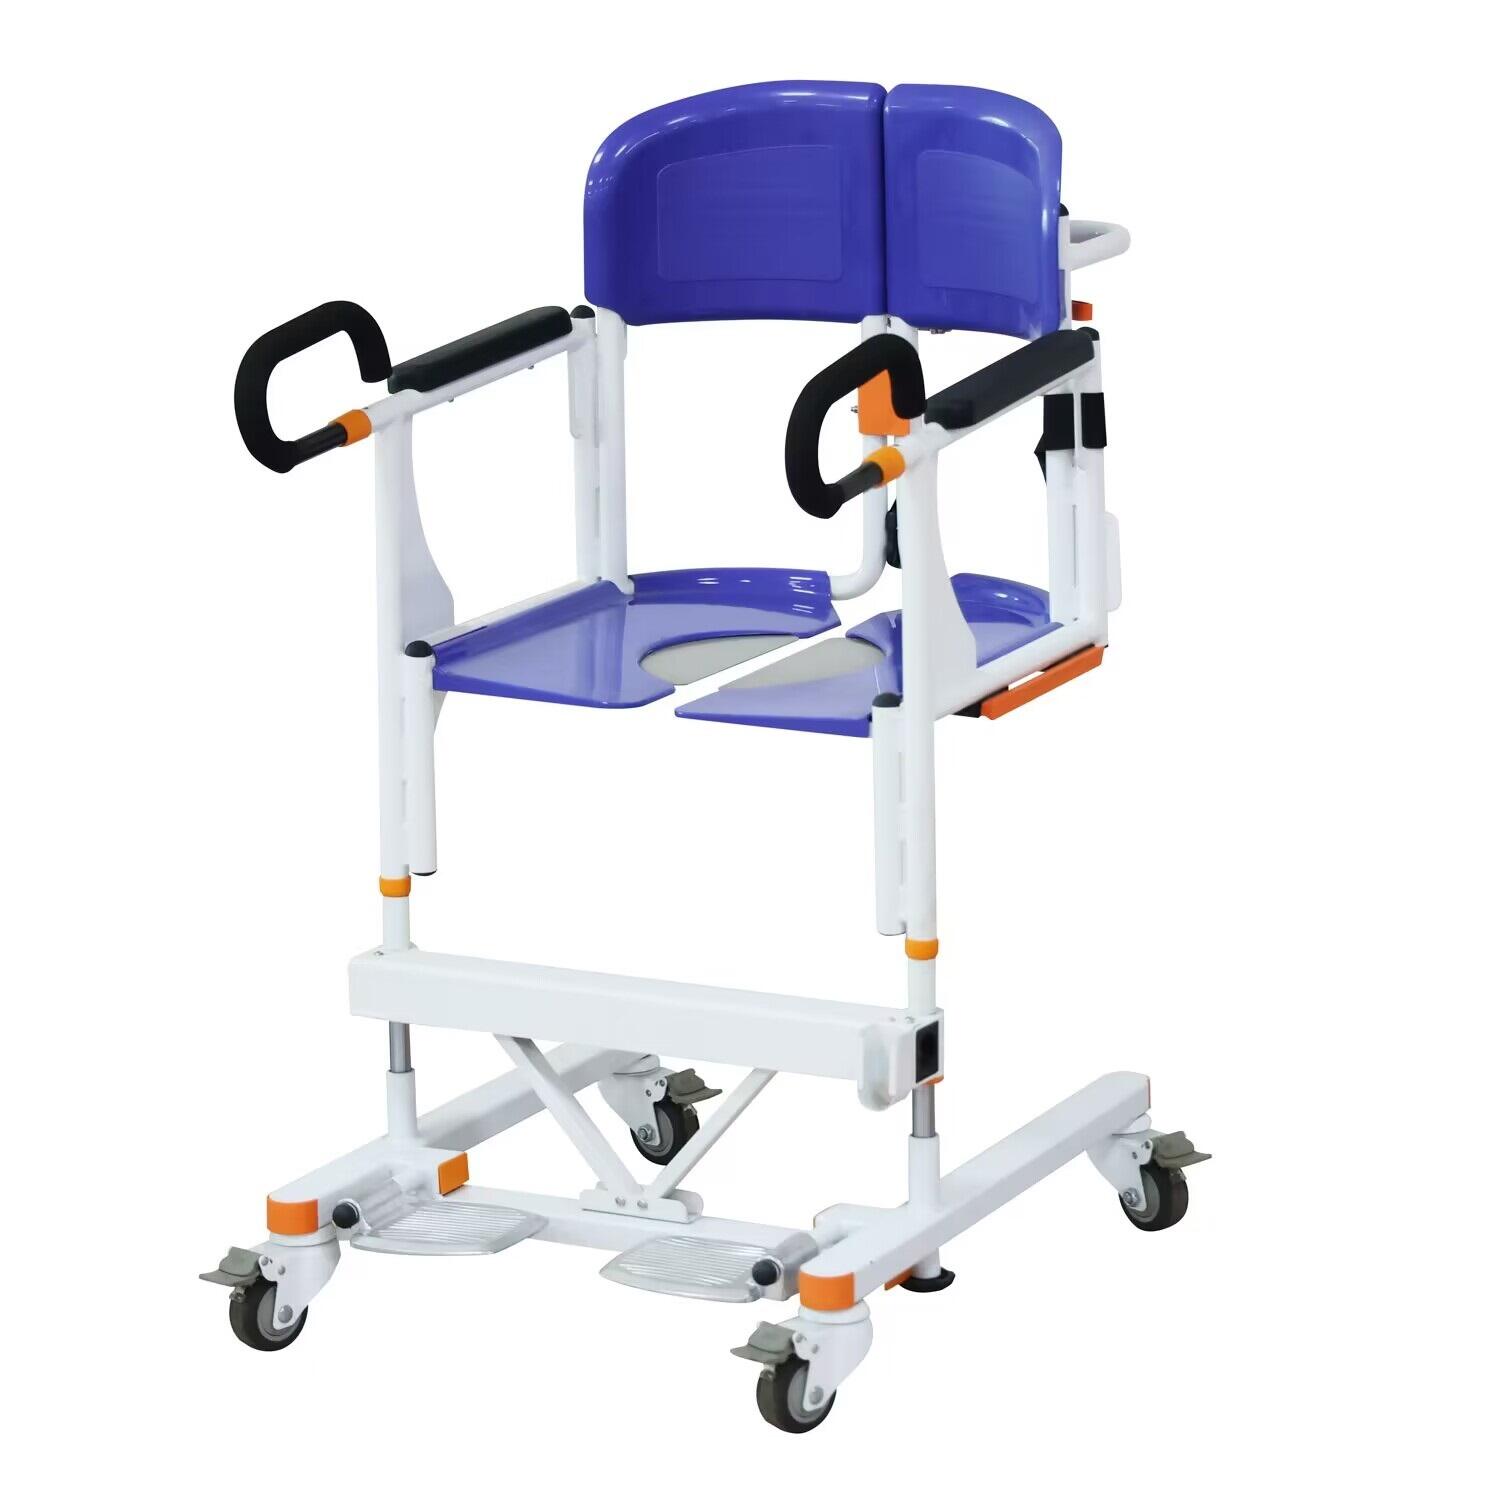 YXH-10B Medical Patient Transport Lift Transfer Chair 